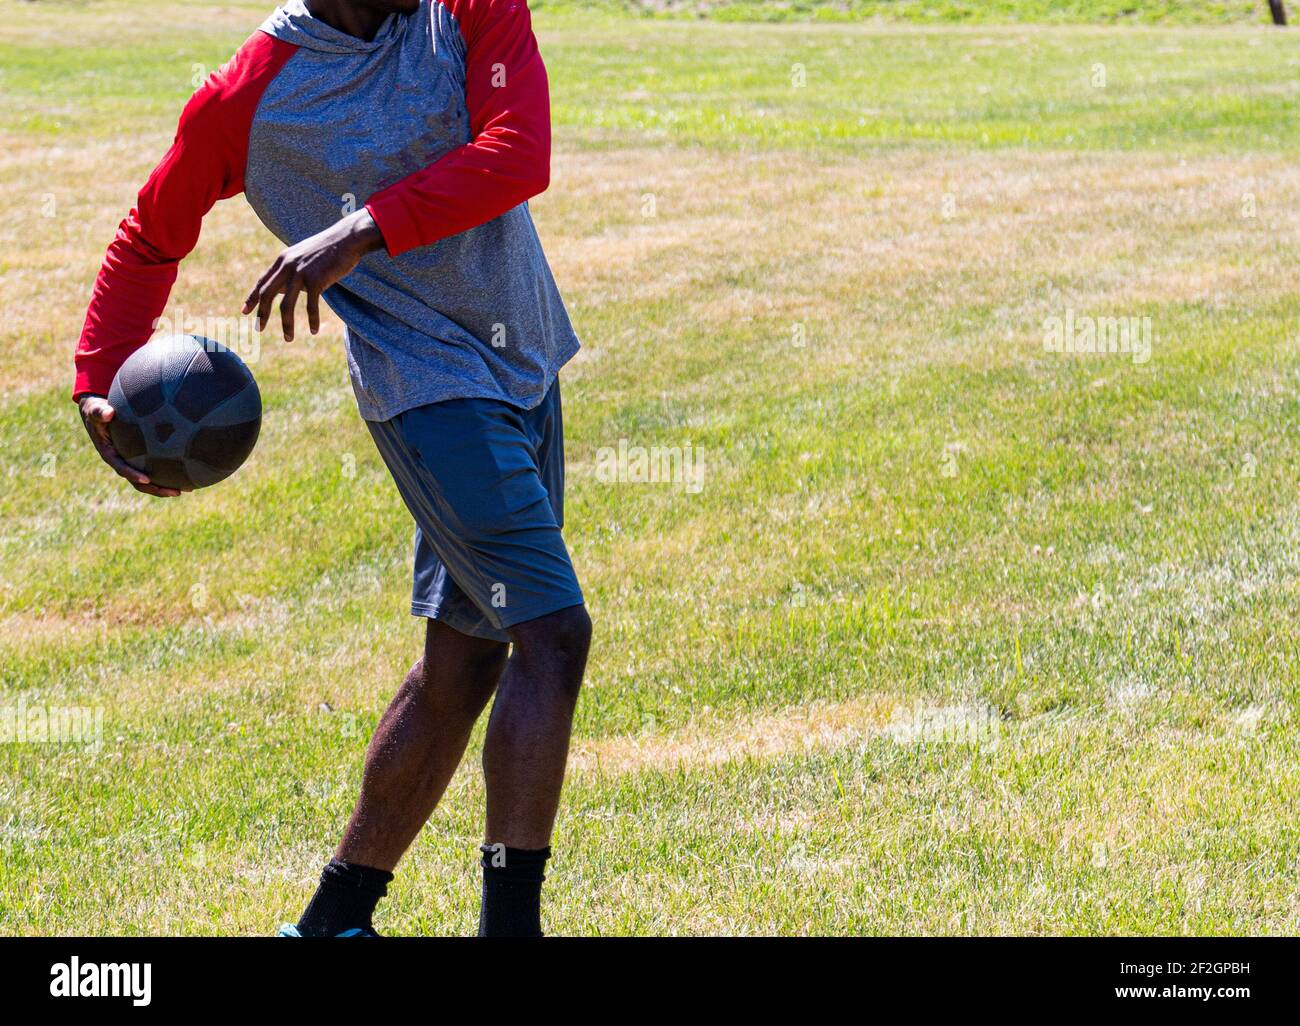 African American male teenager throwing a medicine ball behind his back during track and field practice on grass. Stock Photo